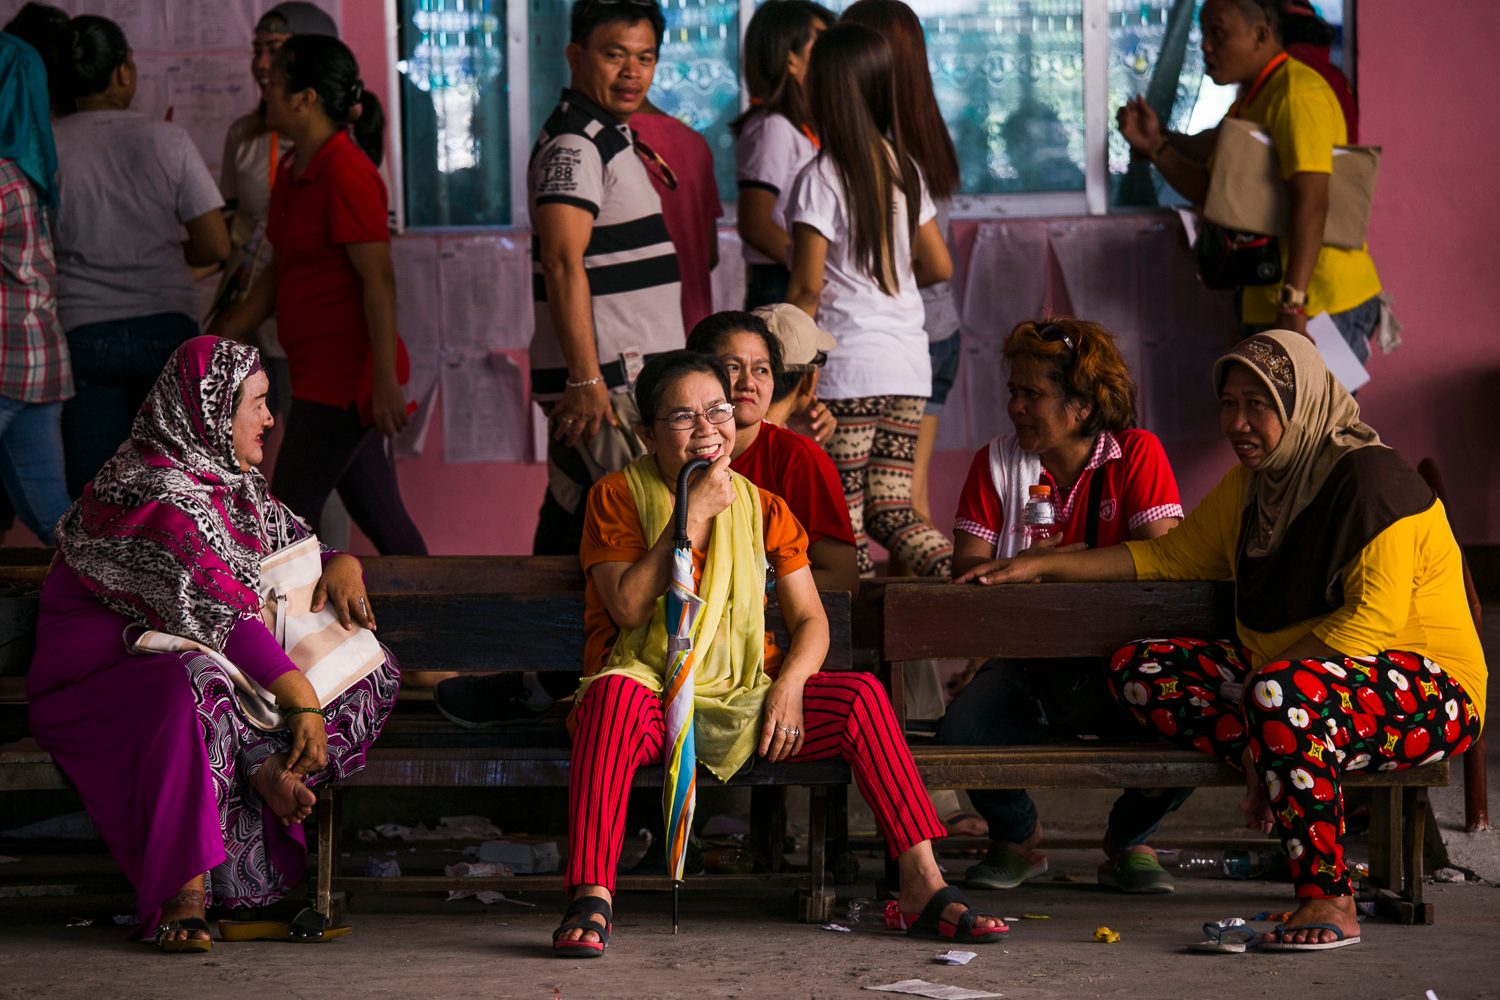 WAITING FOR THEIR TURN. Women wait in the open area of Maharlika Elementary school located in a predominantly Muslim community. Photo by Pat Nabong/Rappler 